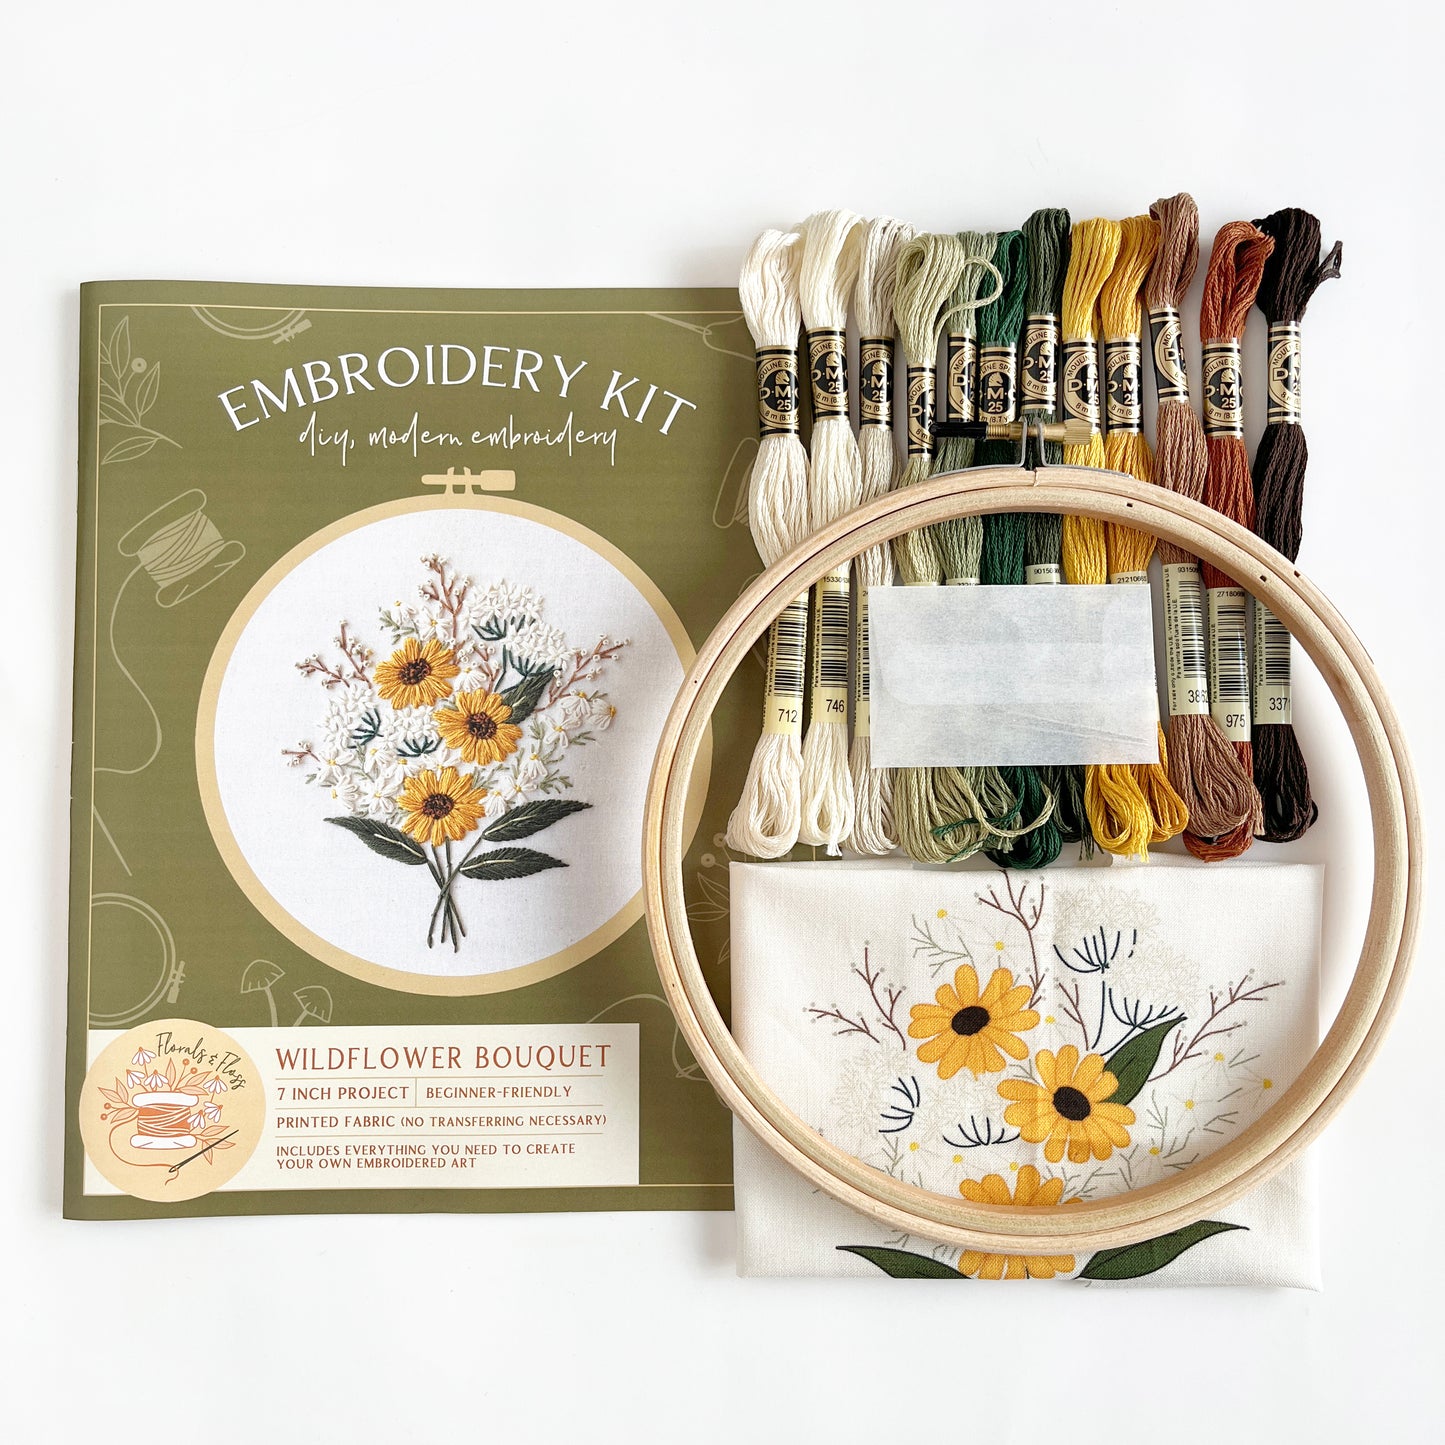 Wildflower Bouquet Embroidery Kit (printed fabric) - 7"